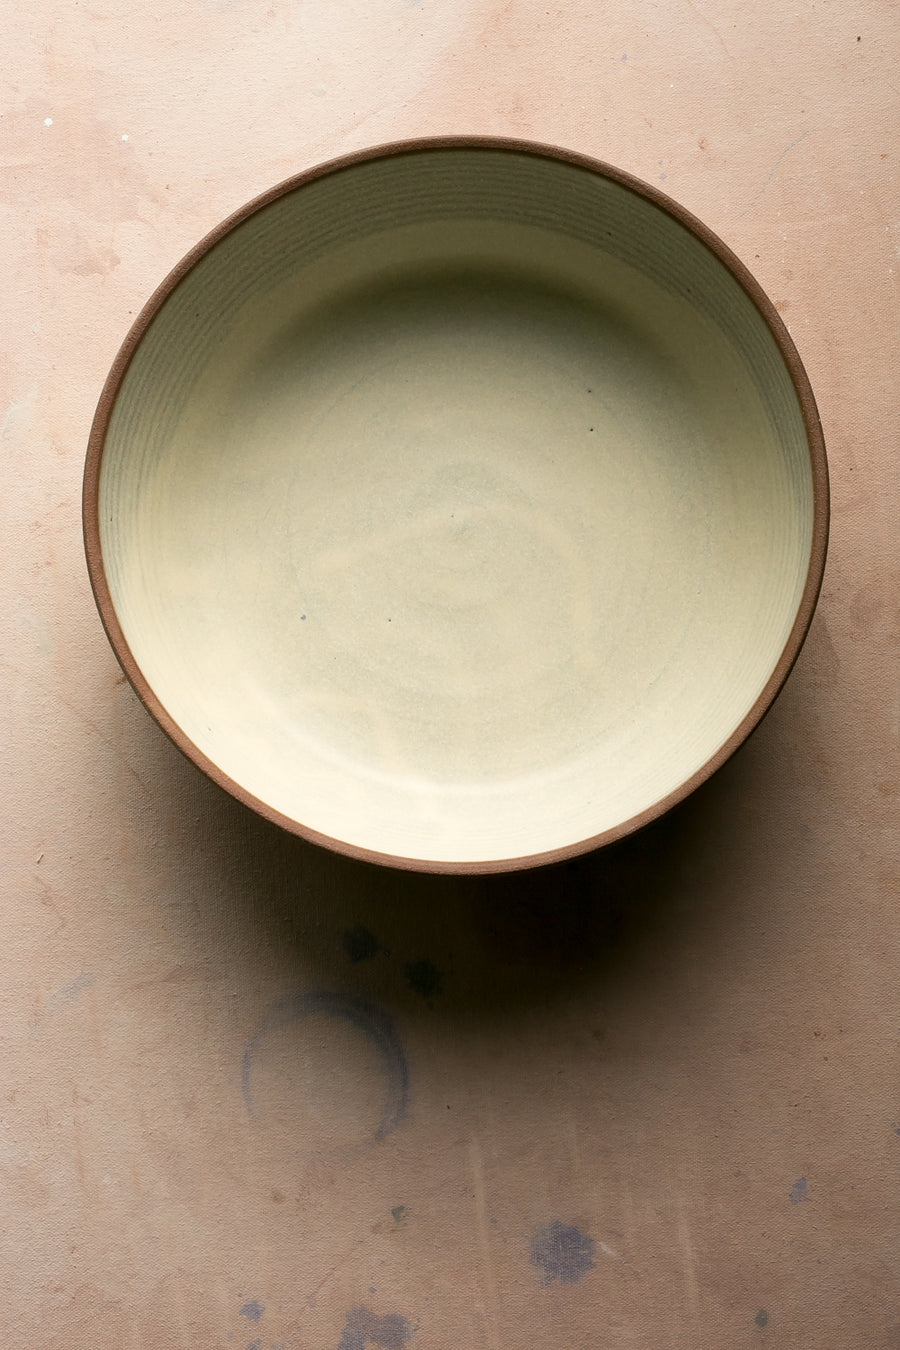 Red Stone Serving Bowl